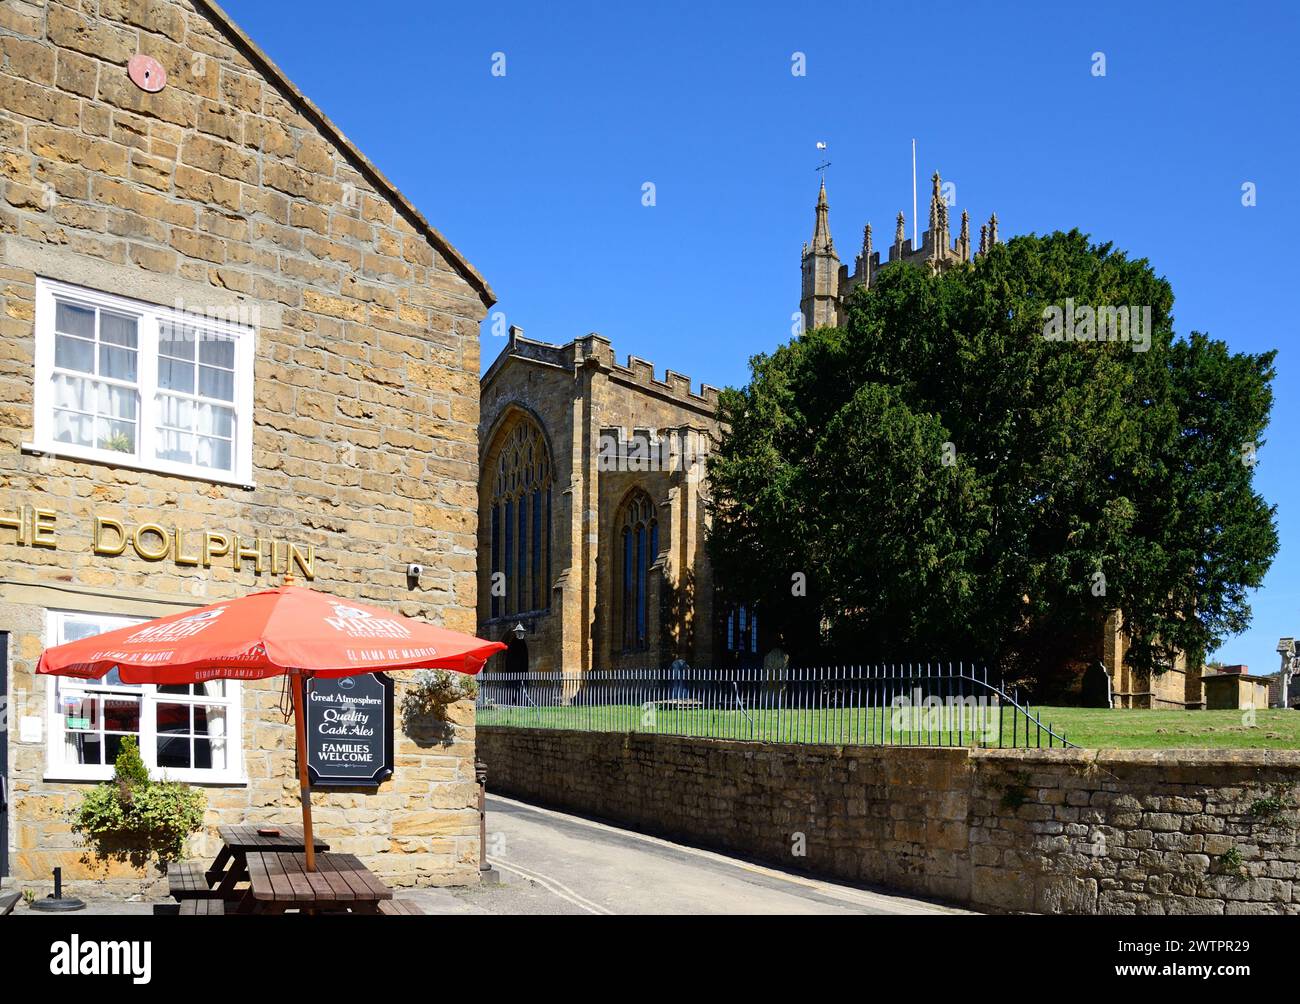 Front view of the Dolphin Inn along Silver Street in the town centre with the minster tower to the rear right, Ilminster, Somerset, UK, Europe. Stock Photo